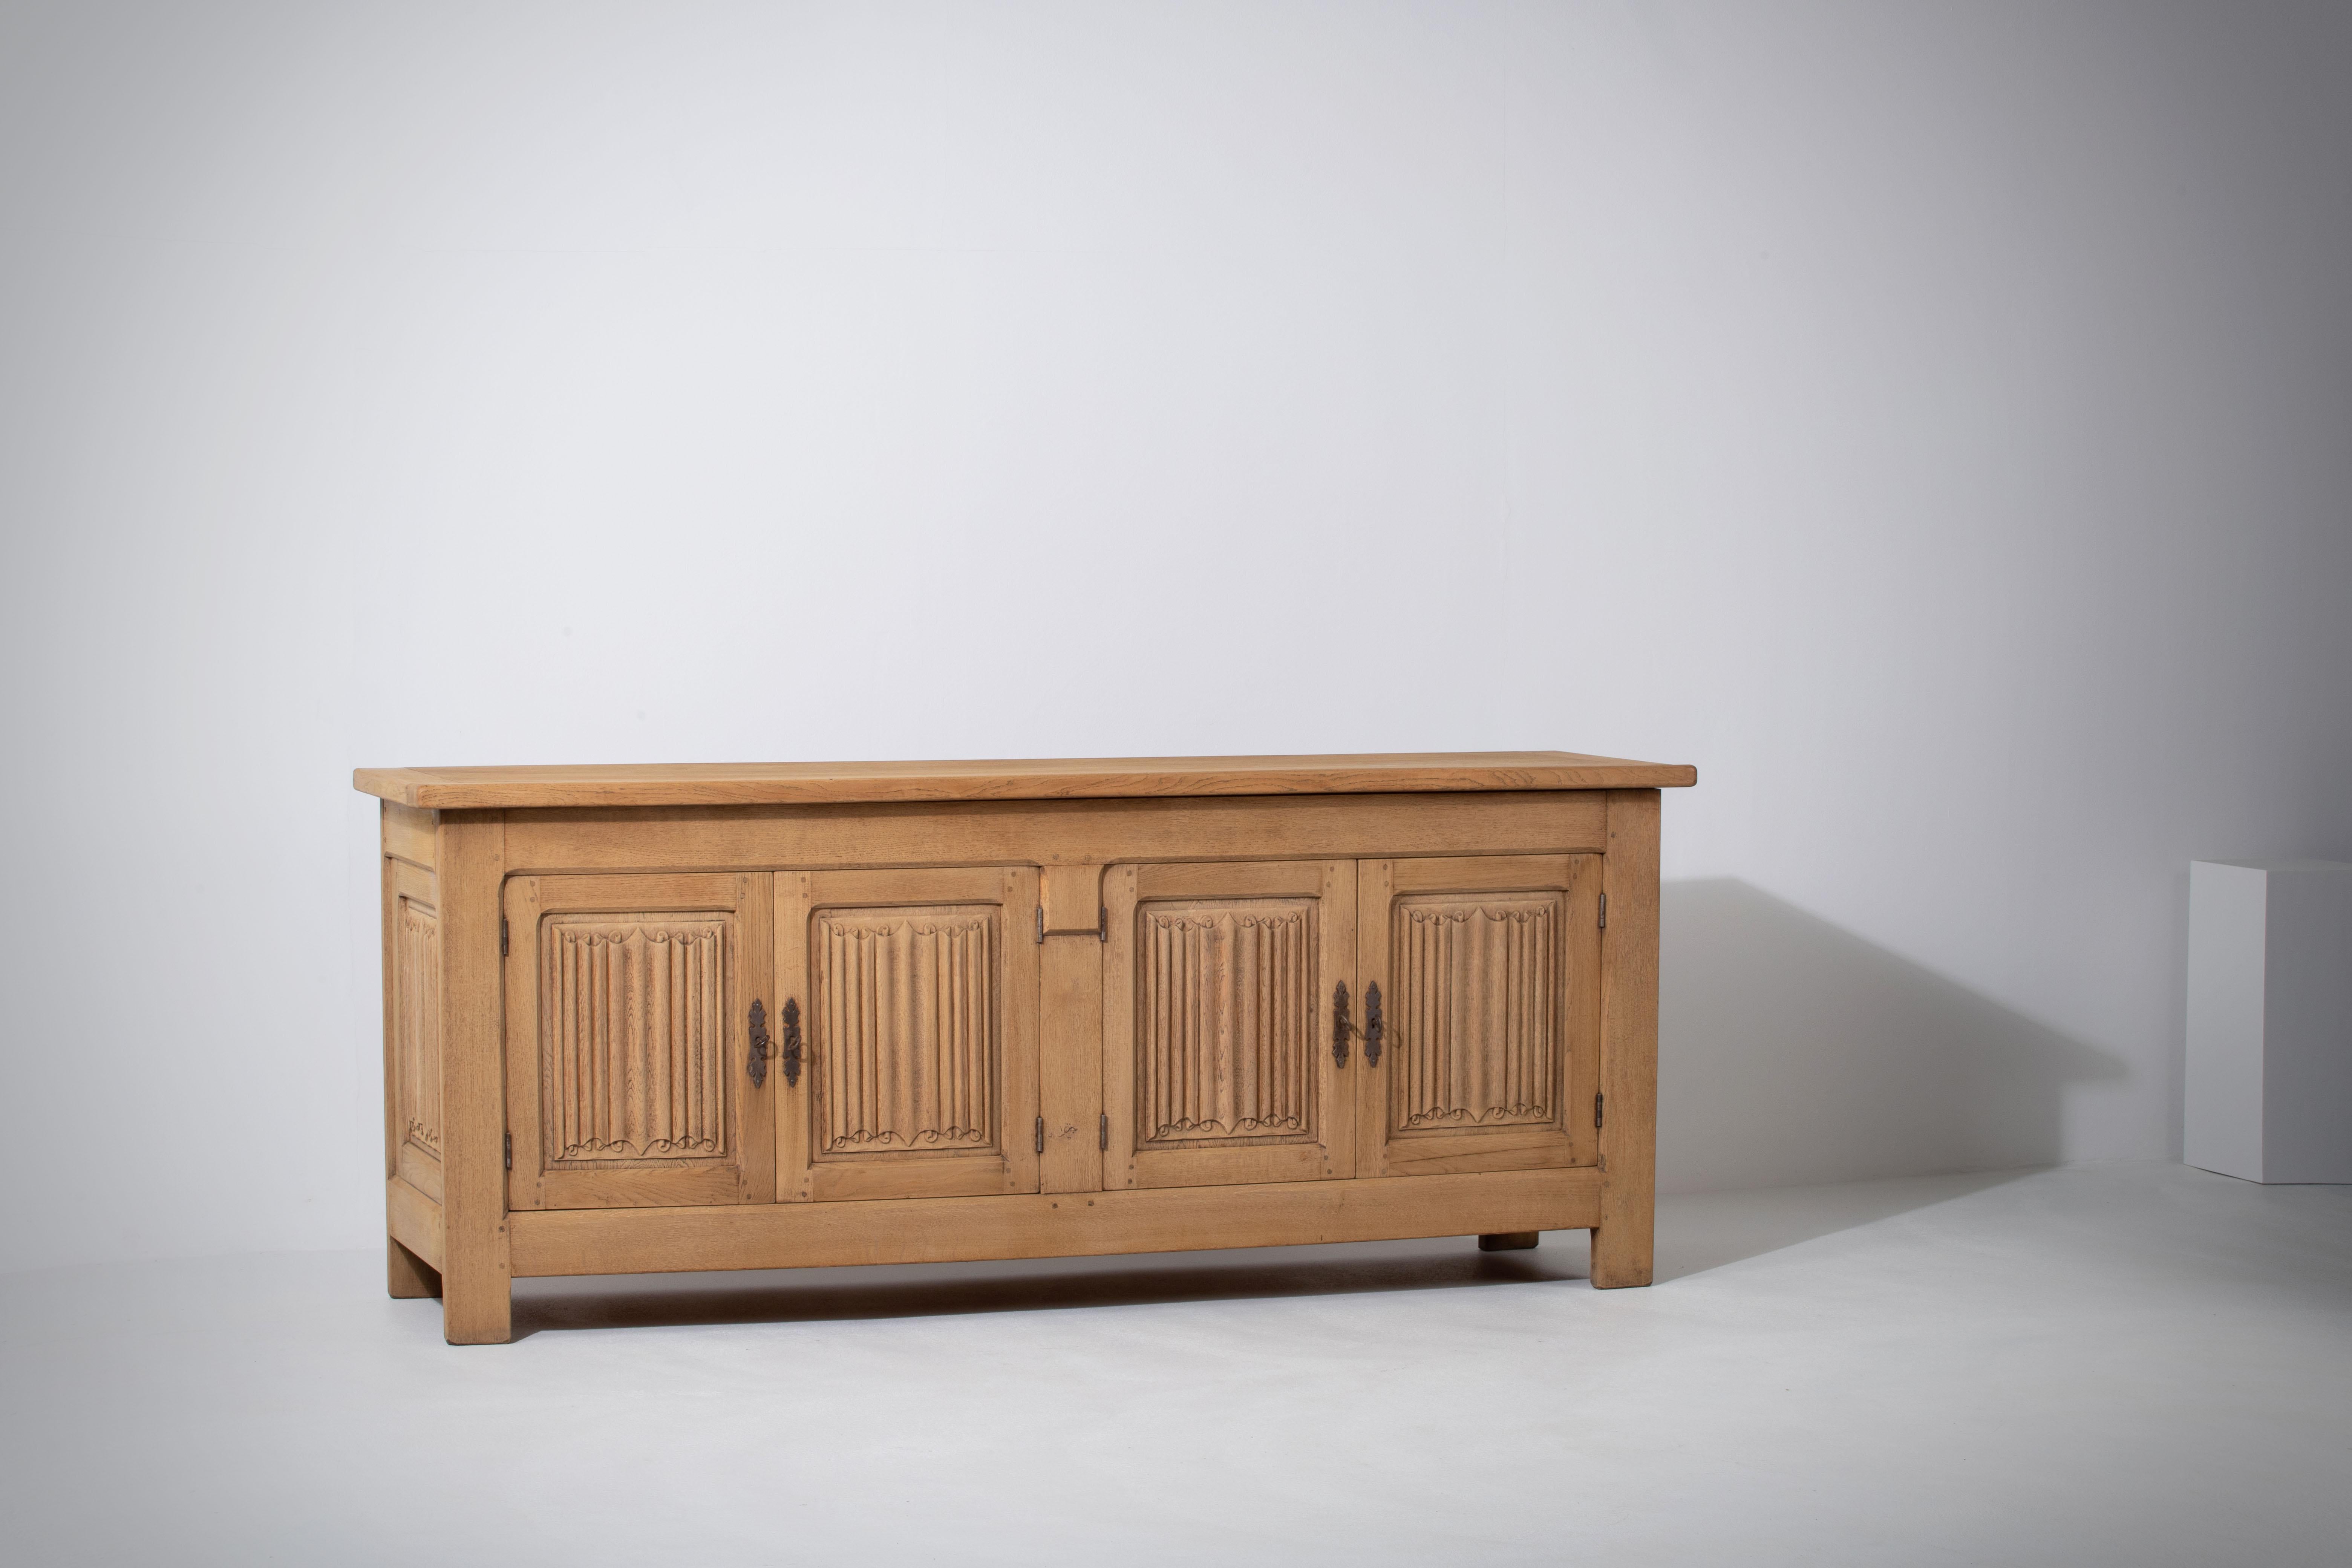 This oak sideboard has a charming story to match its elegant design. It was discovered in a small house in the South Alps region of France, which had been left untouched since the 1950s. The house was adorned with typical Alps decor and tapestry,